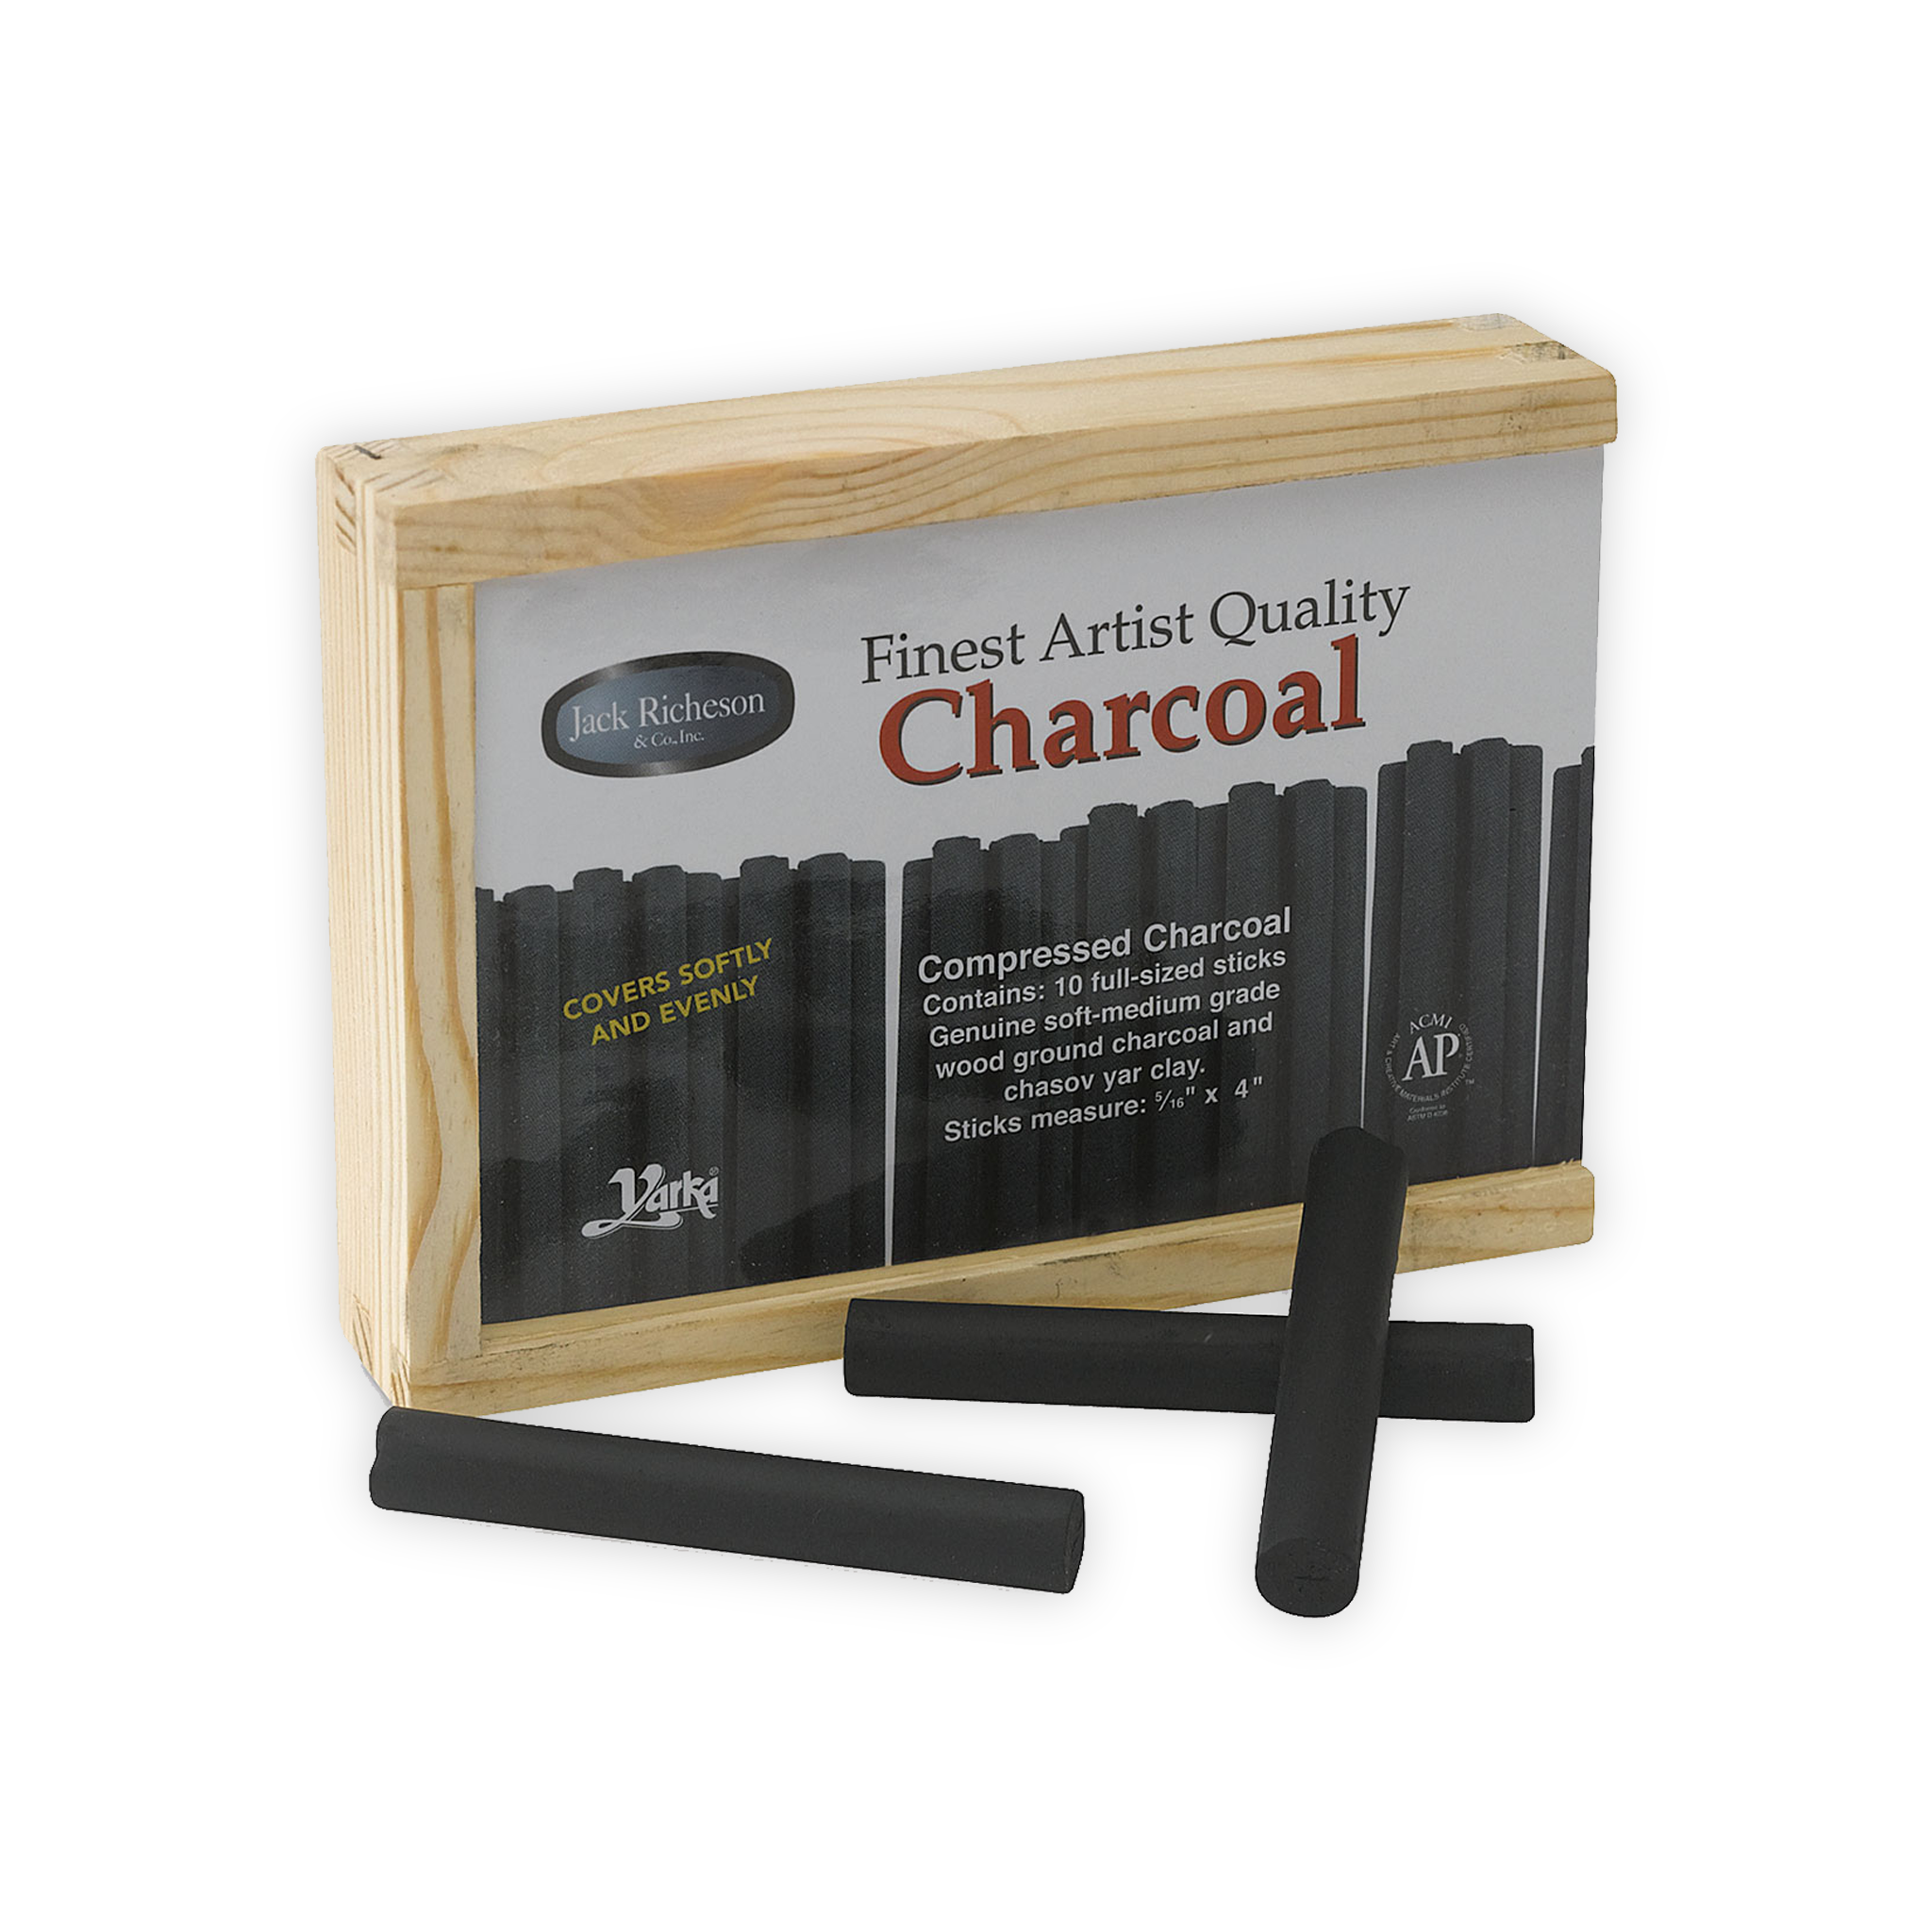 A set of ten charcoal sticks in a wooden box with a slide-out top.